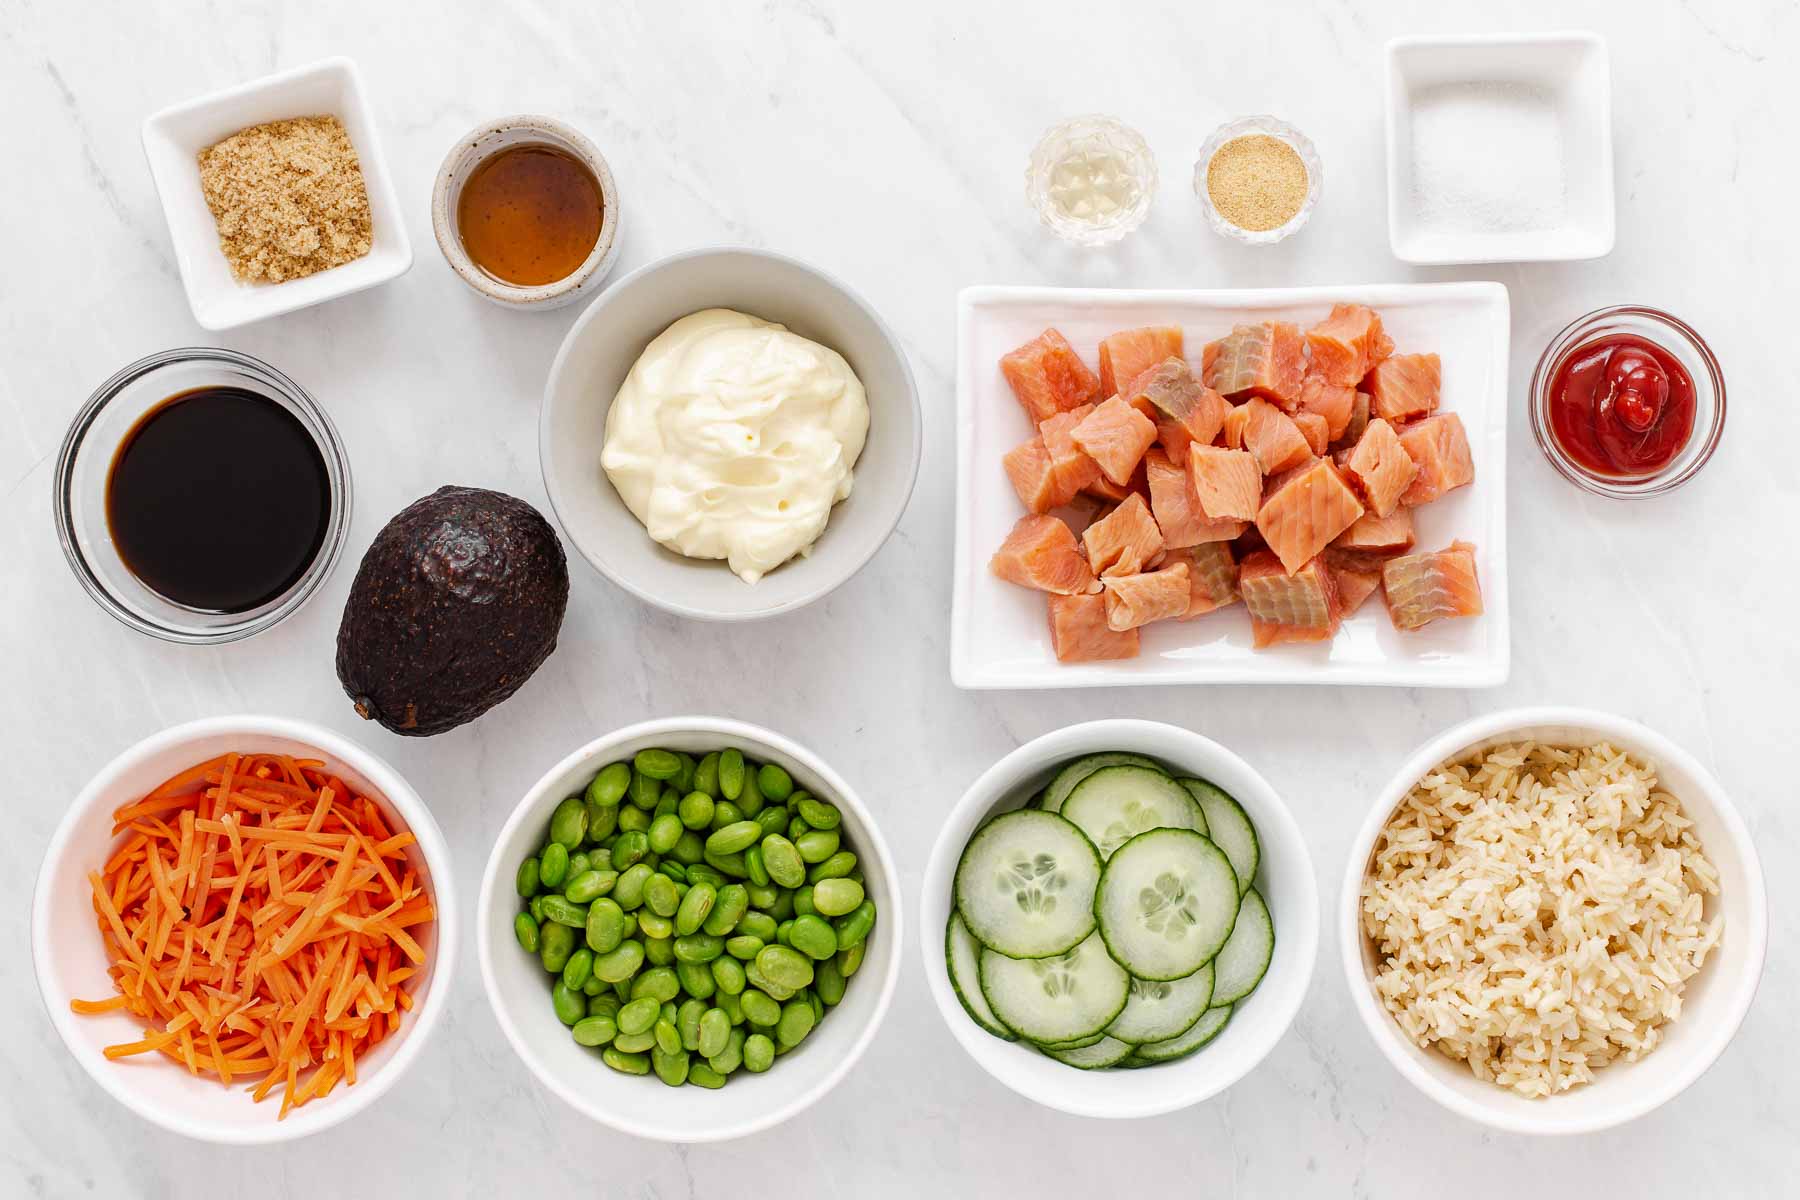 Bowls of fresh vegetables, cubed salmon, rice, and sauce ingredients on white counter.